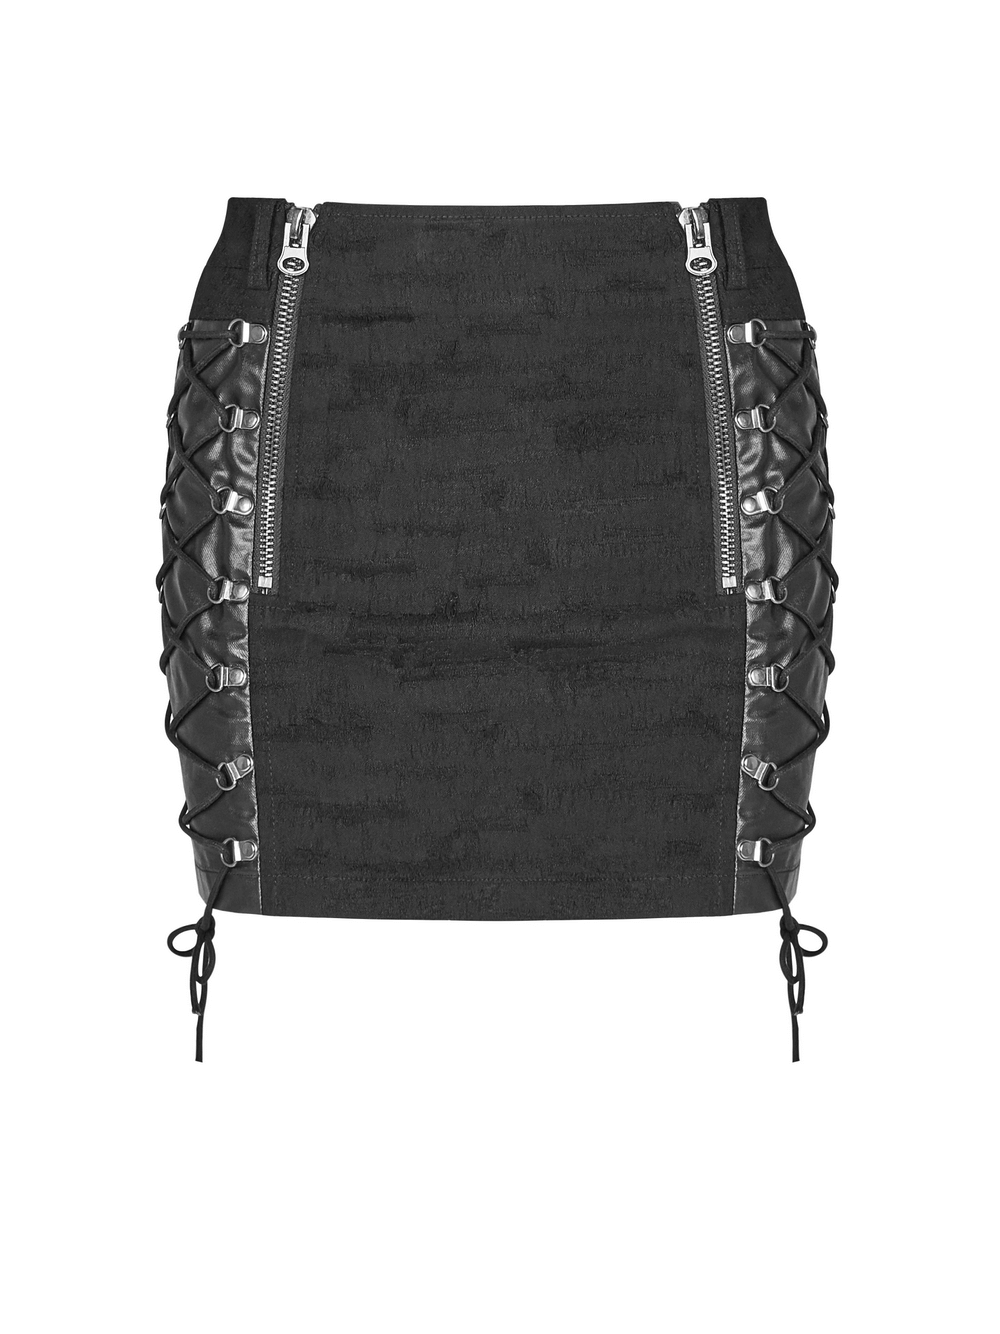 Edgy Punk Metal Half Skirt with Rivet and Rope Detail